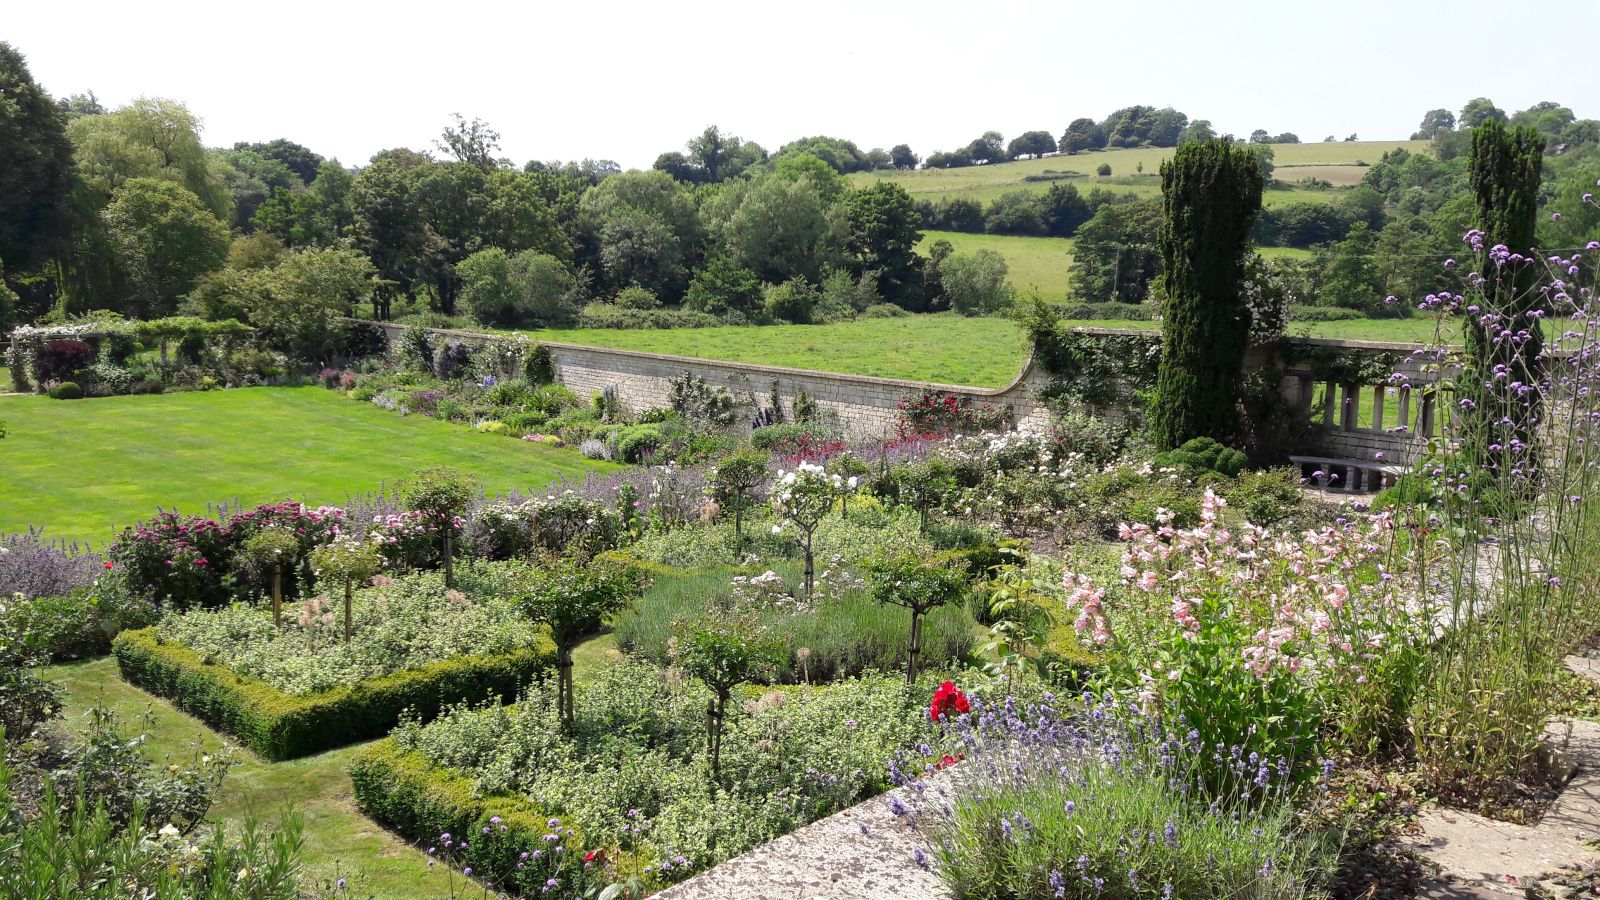 The beautiful gardens of Rowley Grange will provide the setting for the event.